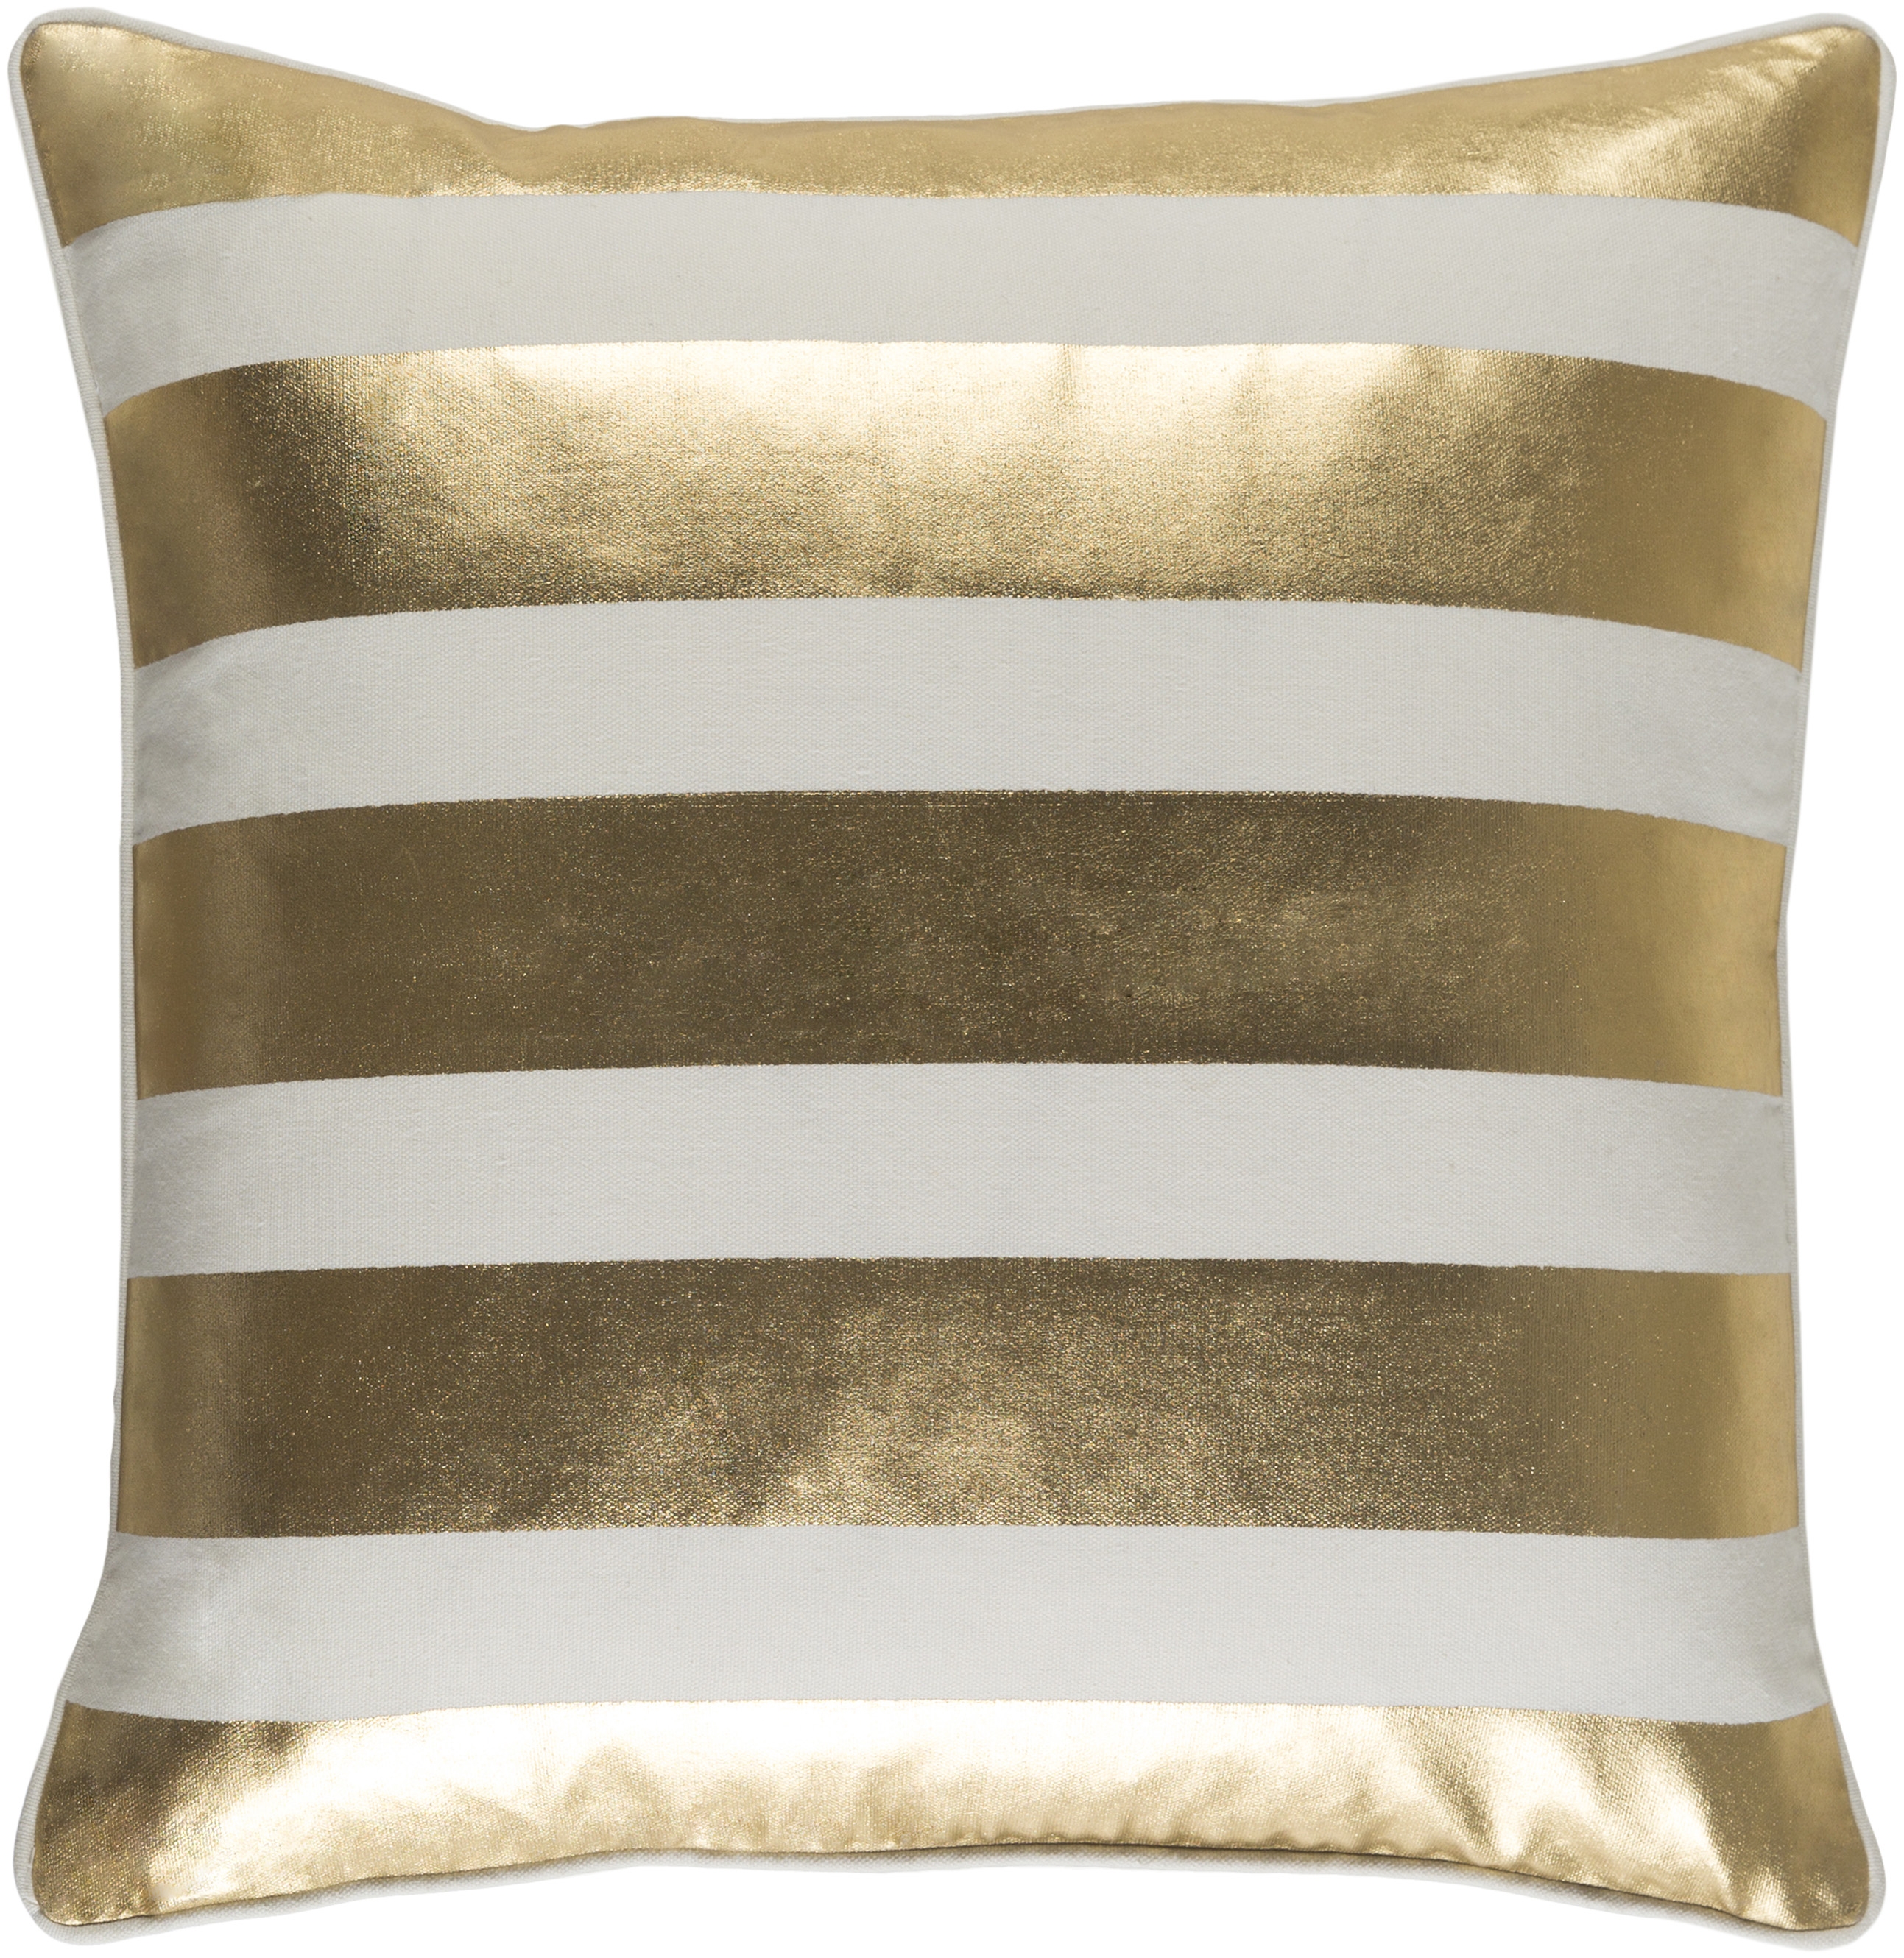 Glyph - GLYP-7080 - 18" x 18" - pillow cover only - Image 0